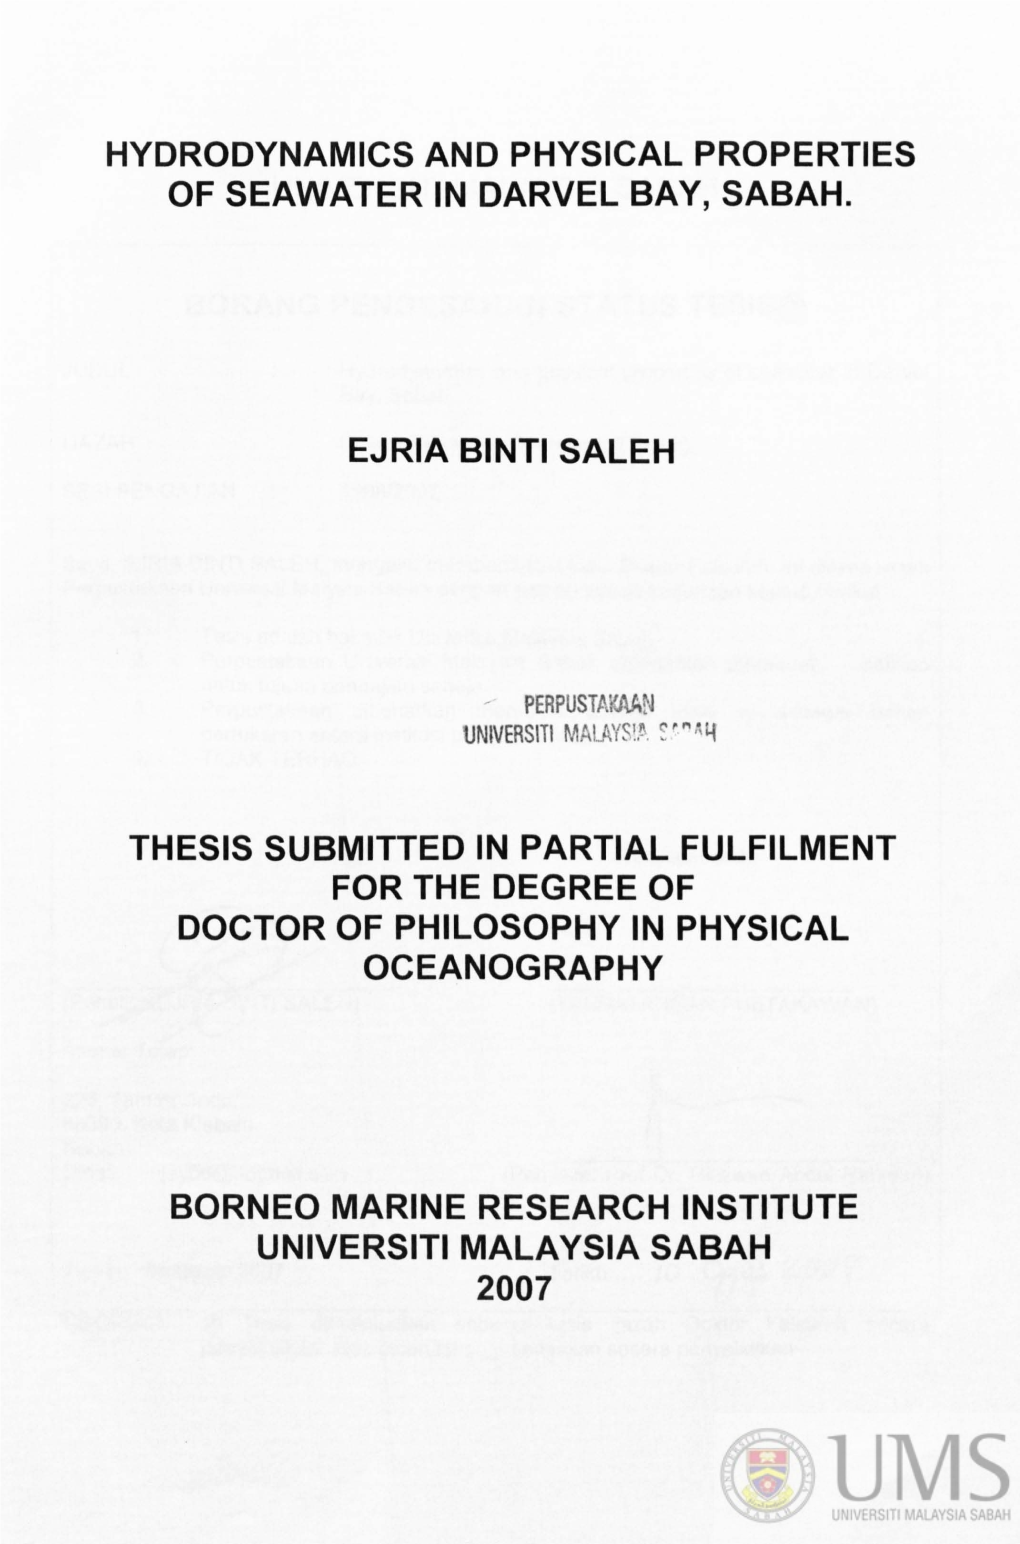 Hydrodynamics and Physical Properties of Seawater in Darvel Bay, Sabah